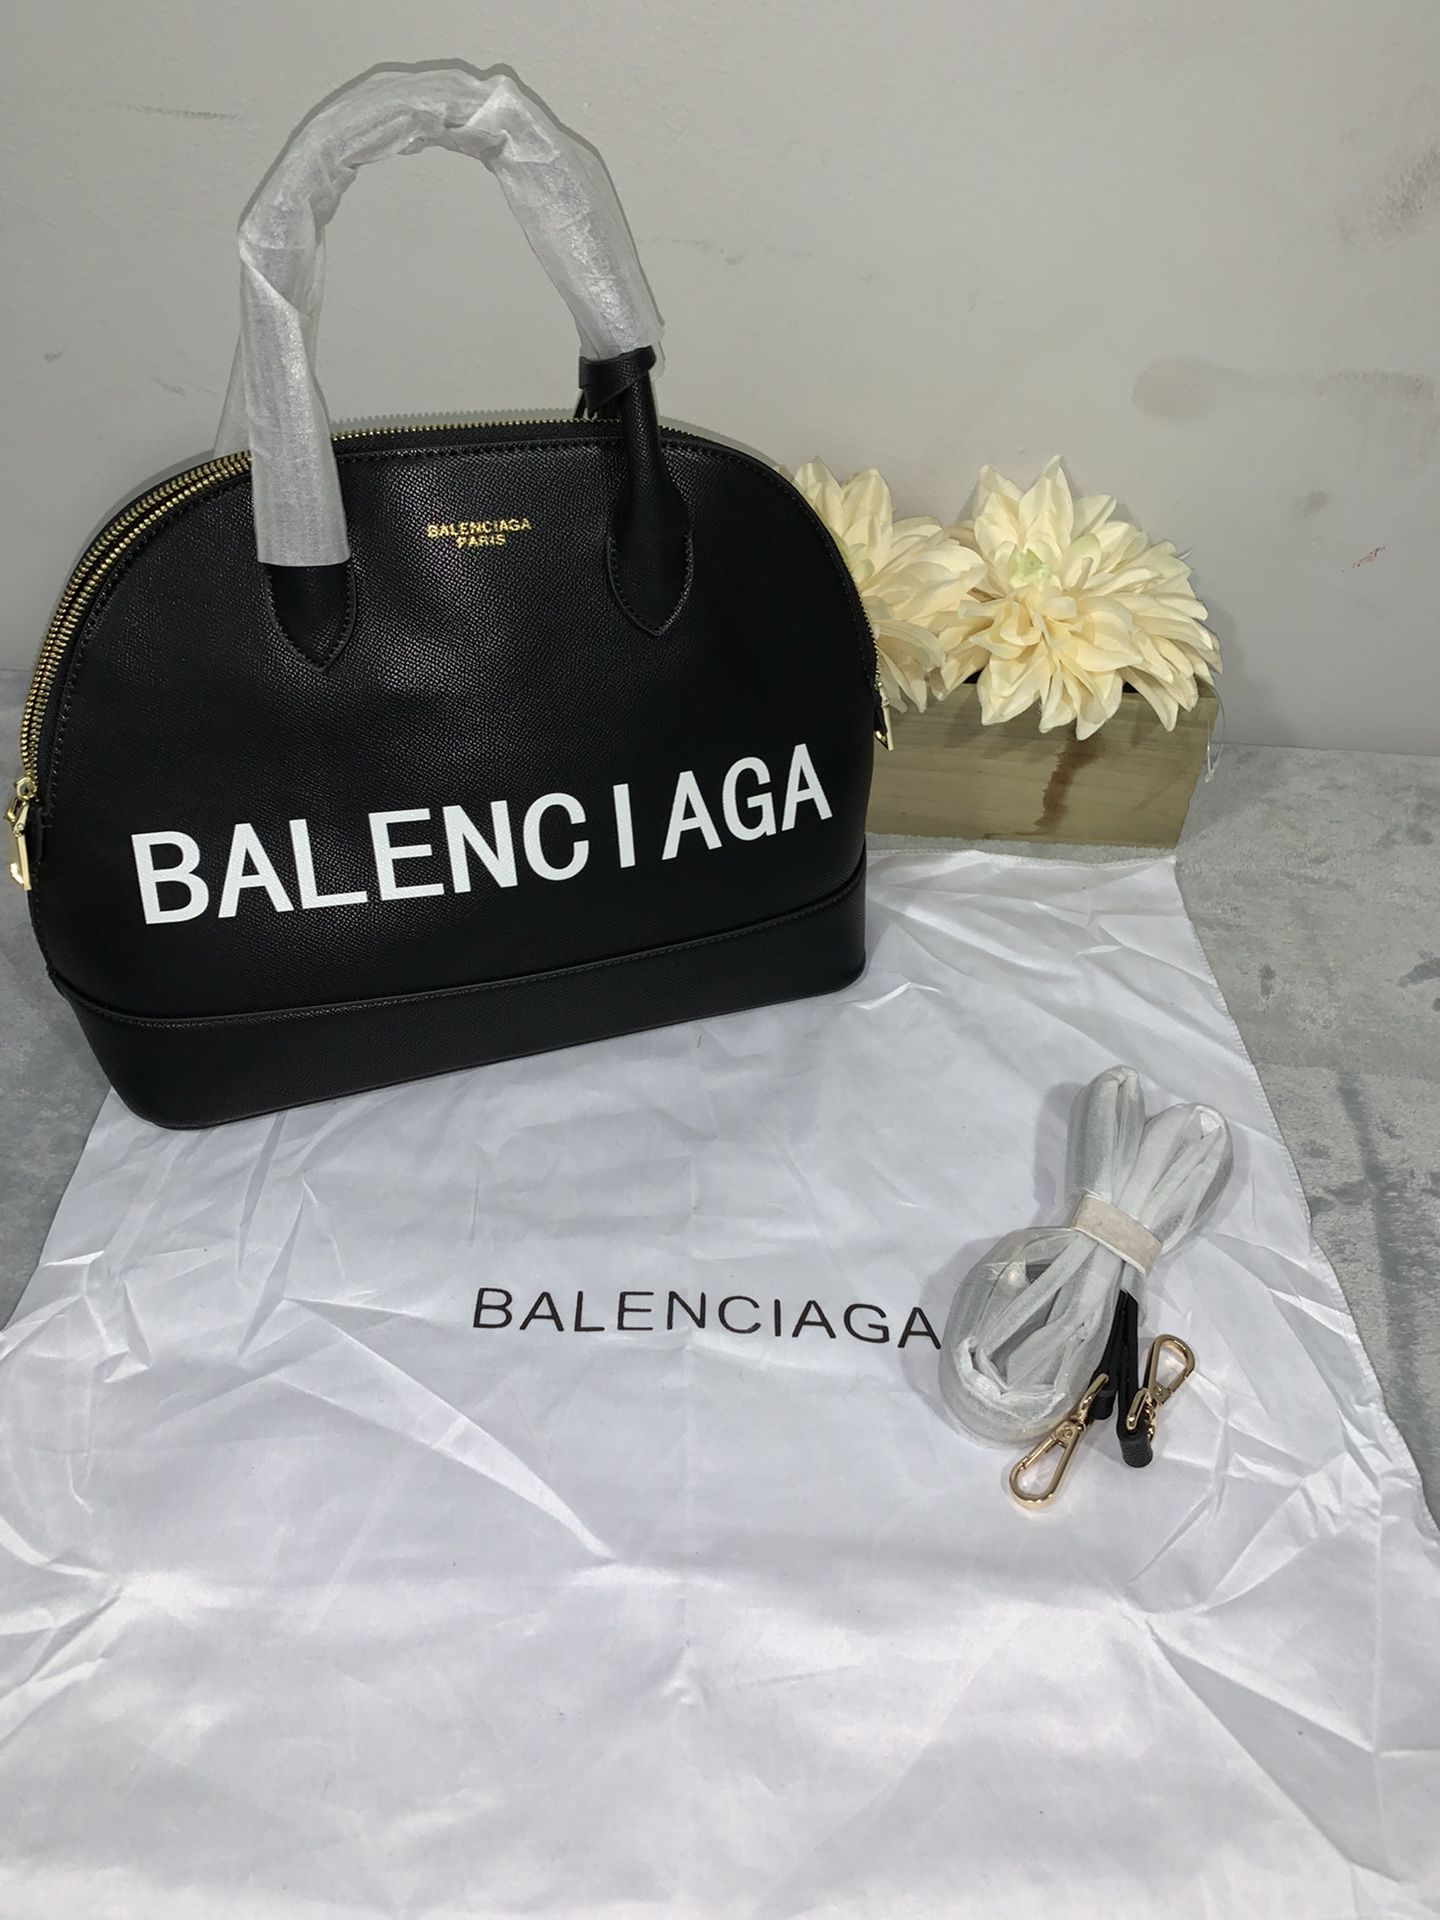 ære lindre sollys Womens Balenciaga Purse for Sale in Federal Way, WA - OfferUp